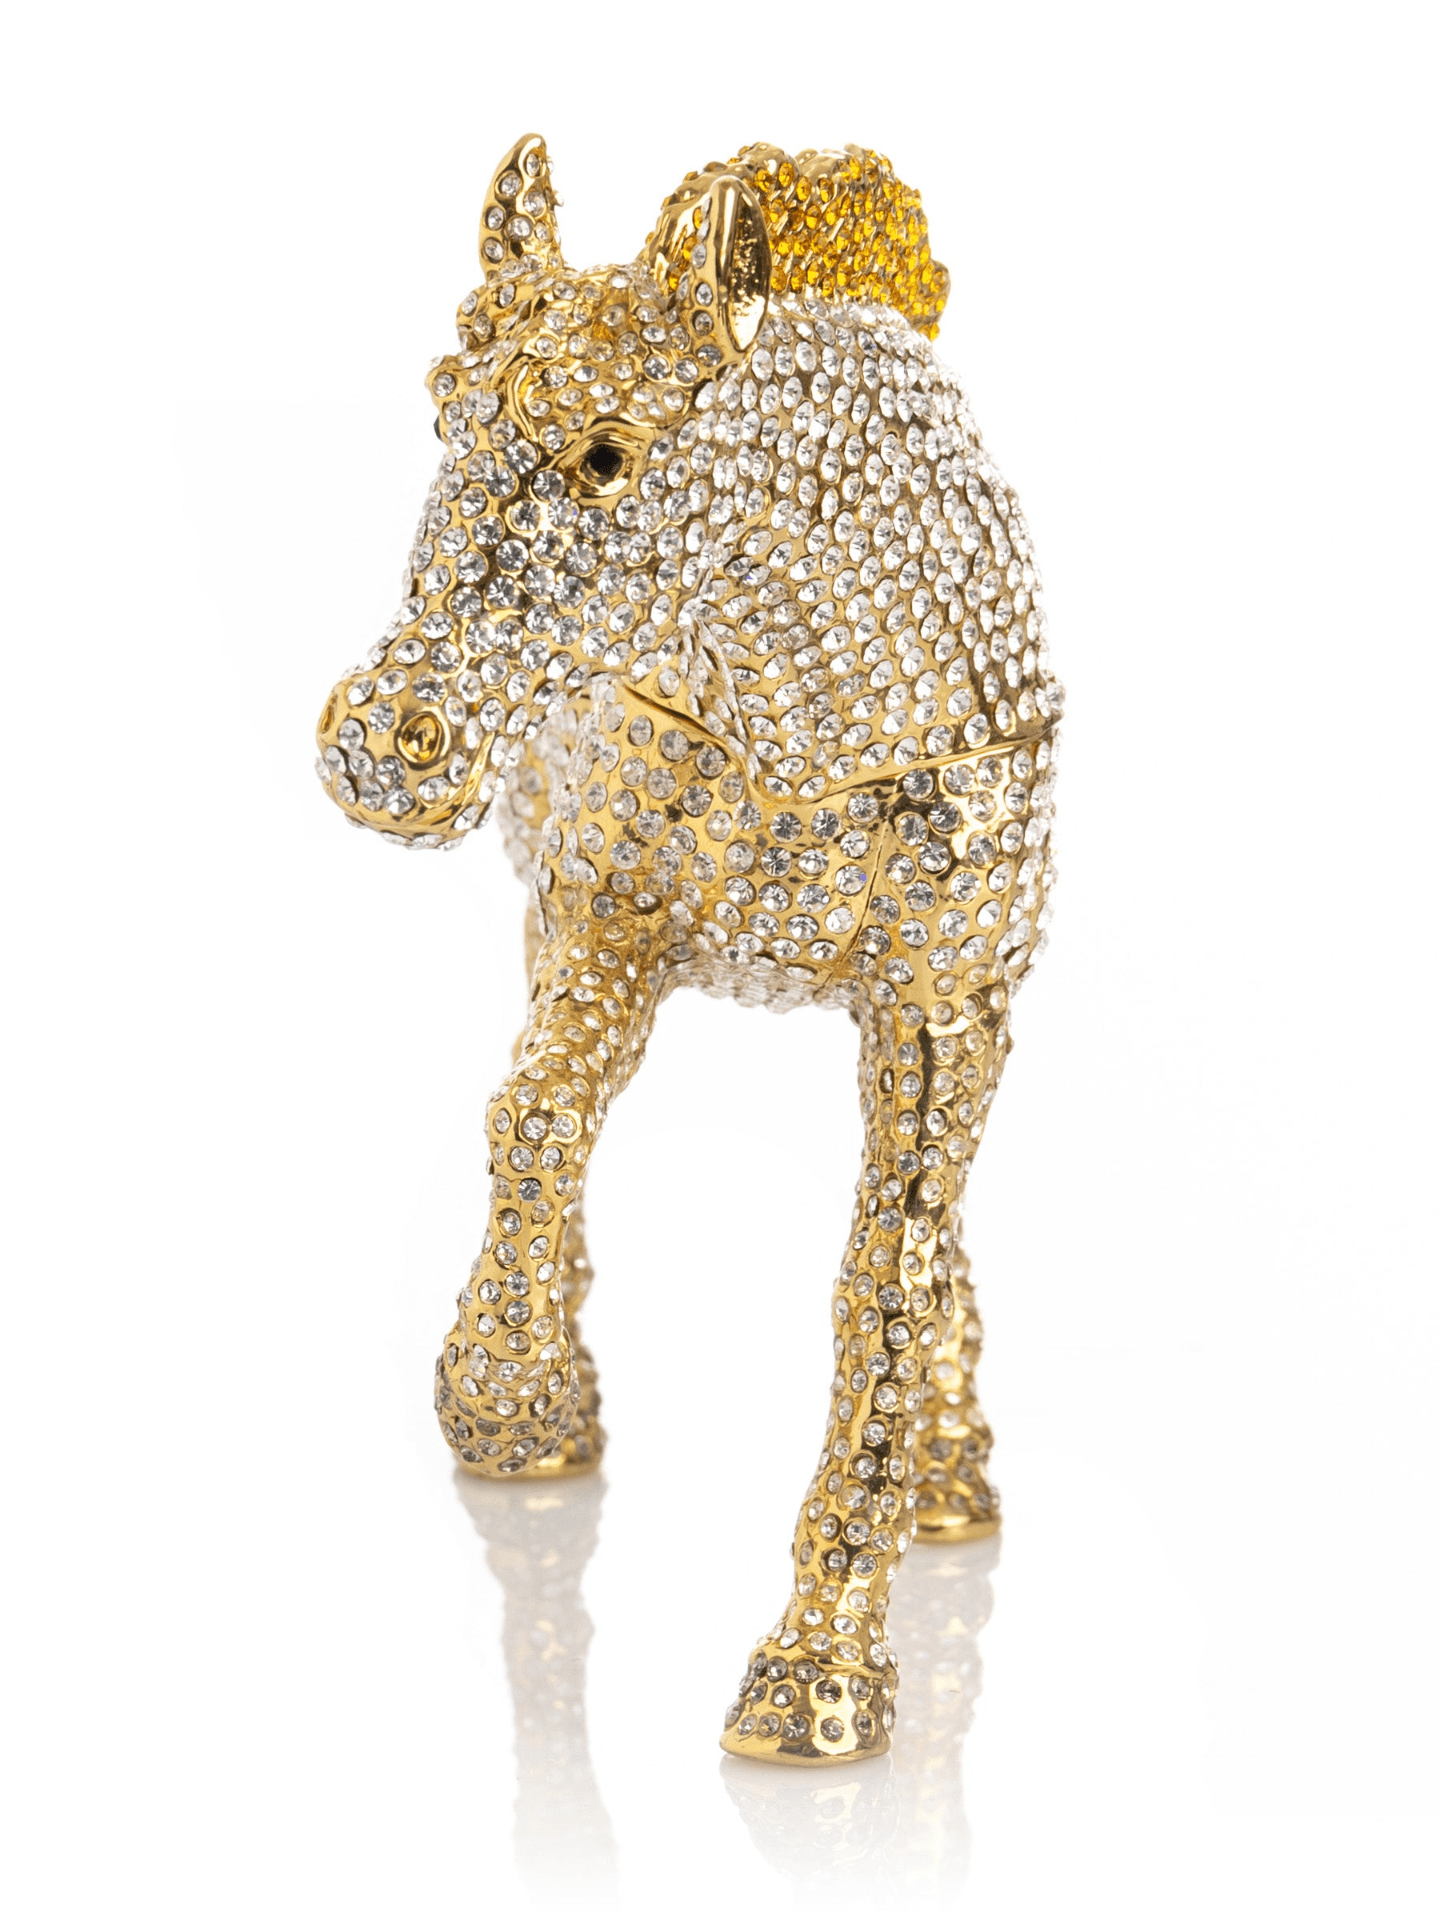 Large Golden Horse Decorated with White Crystals  